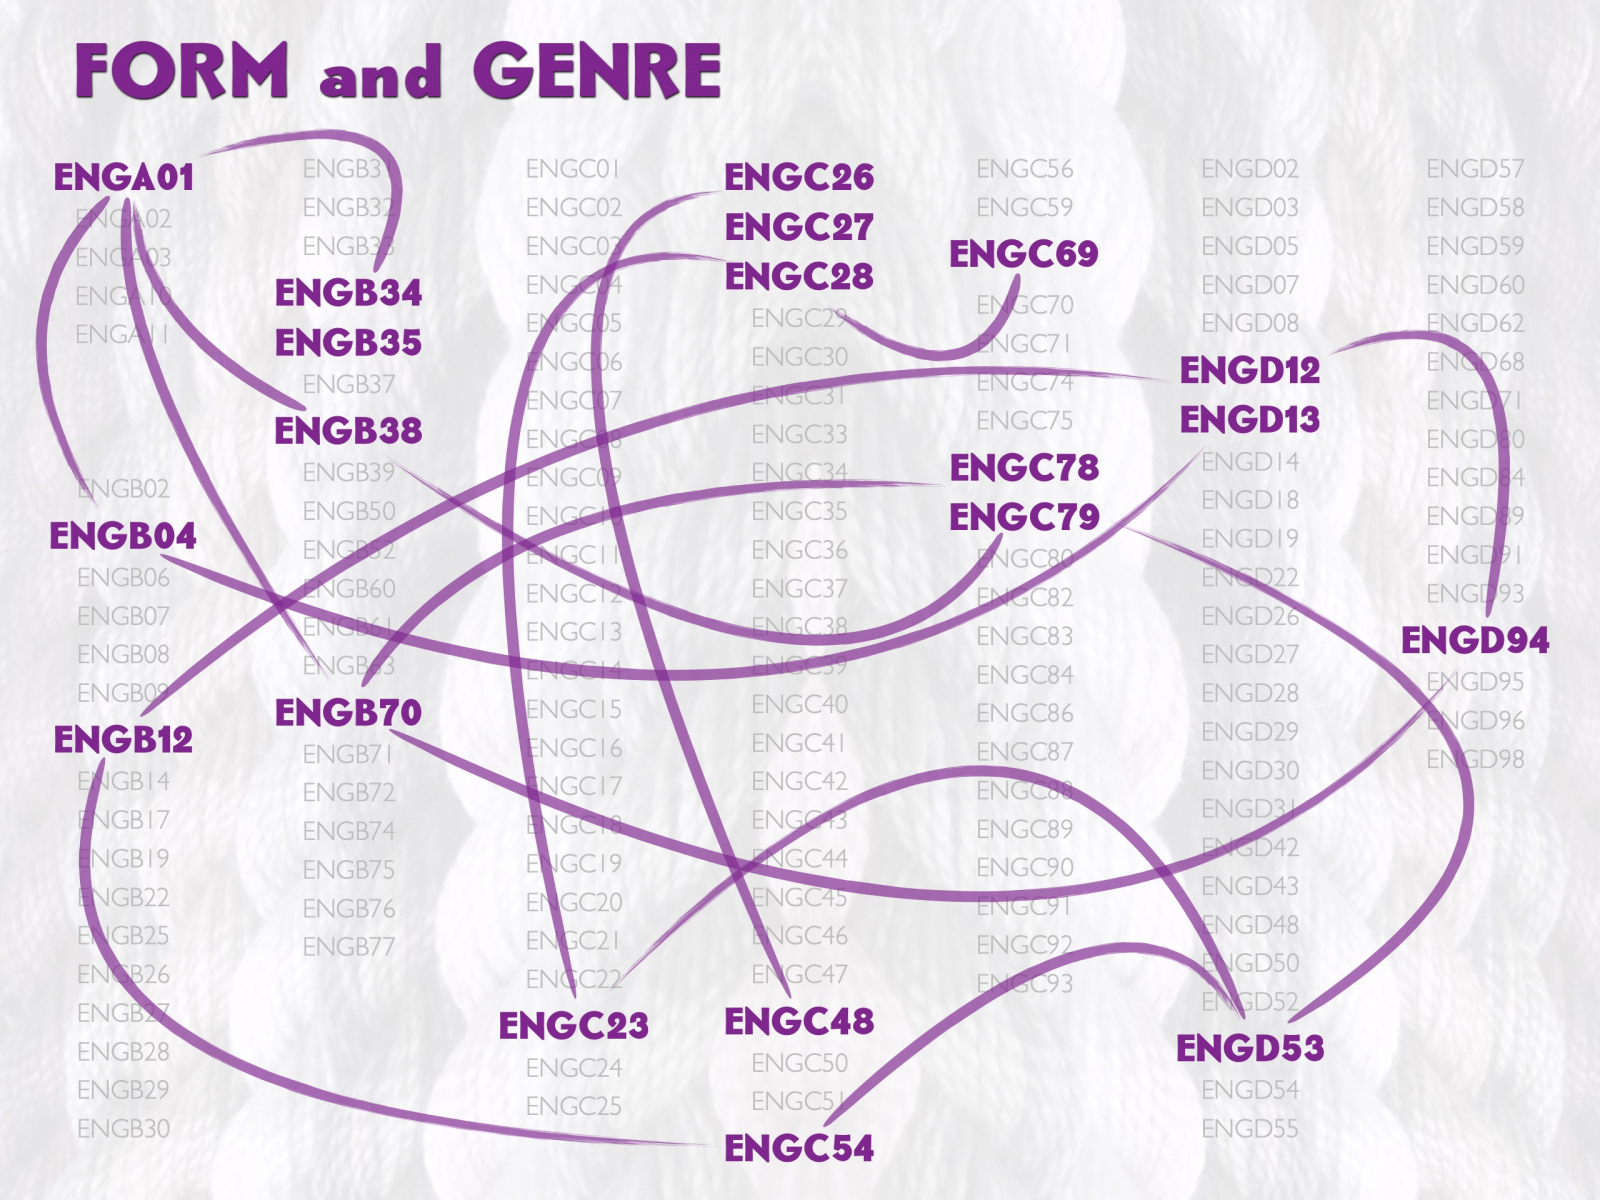 Form and Genre road map